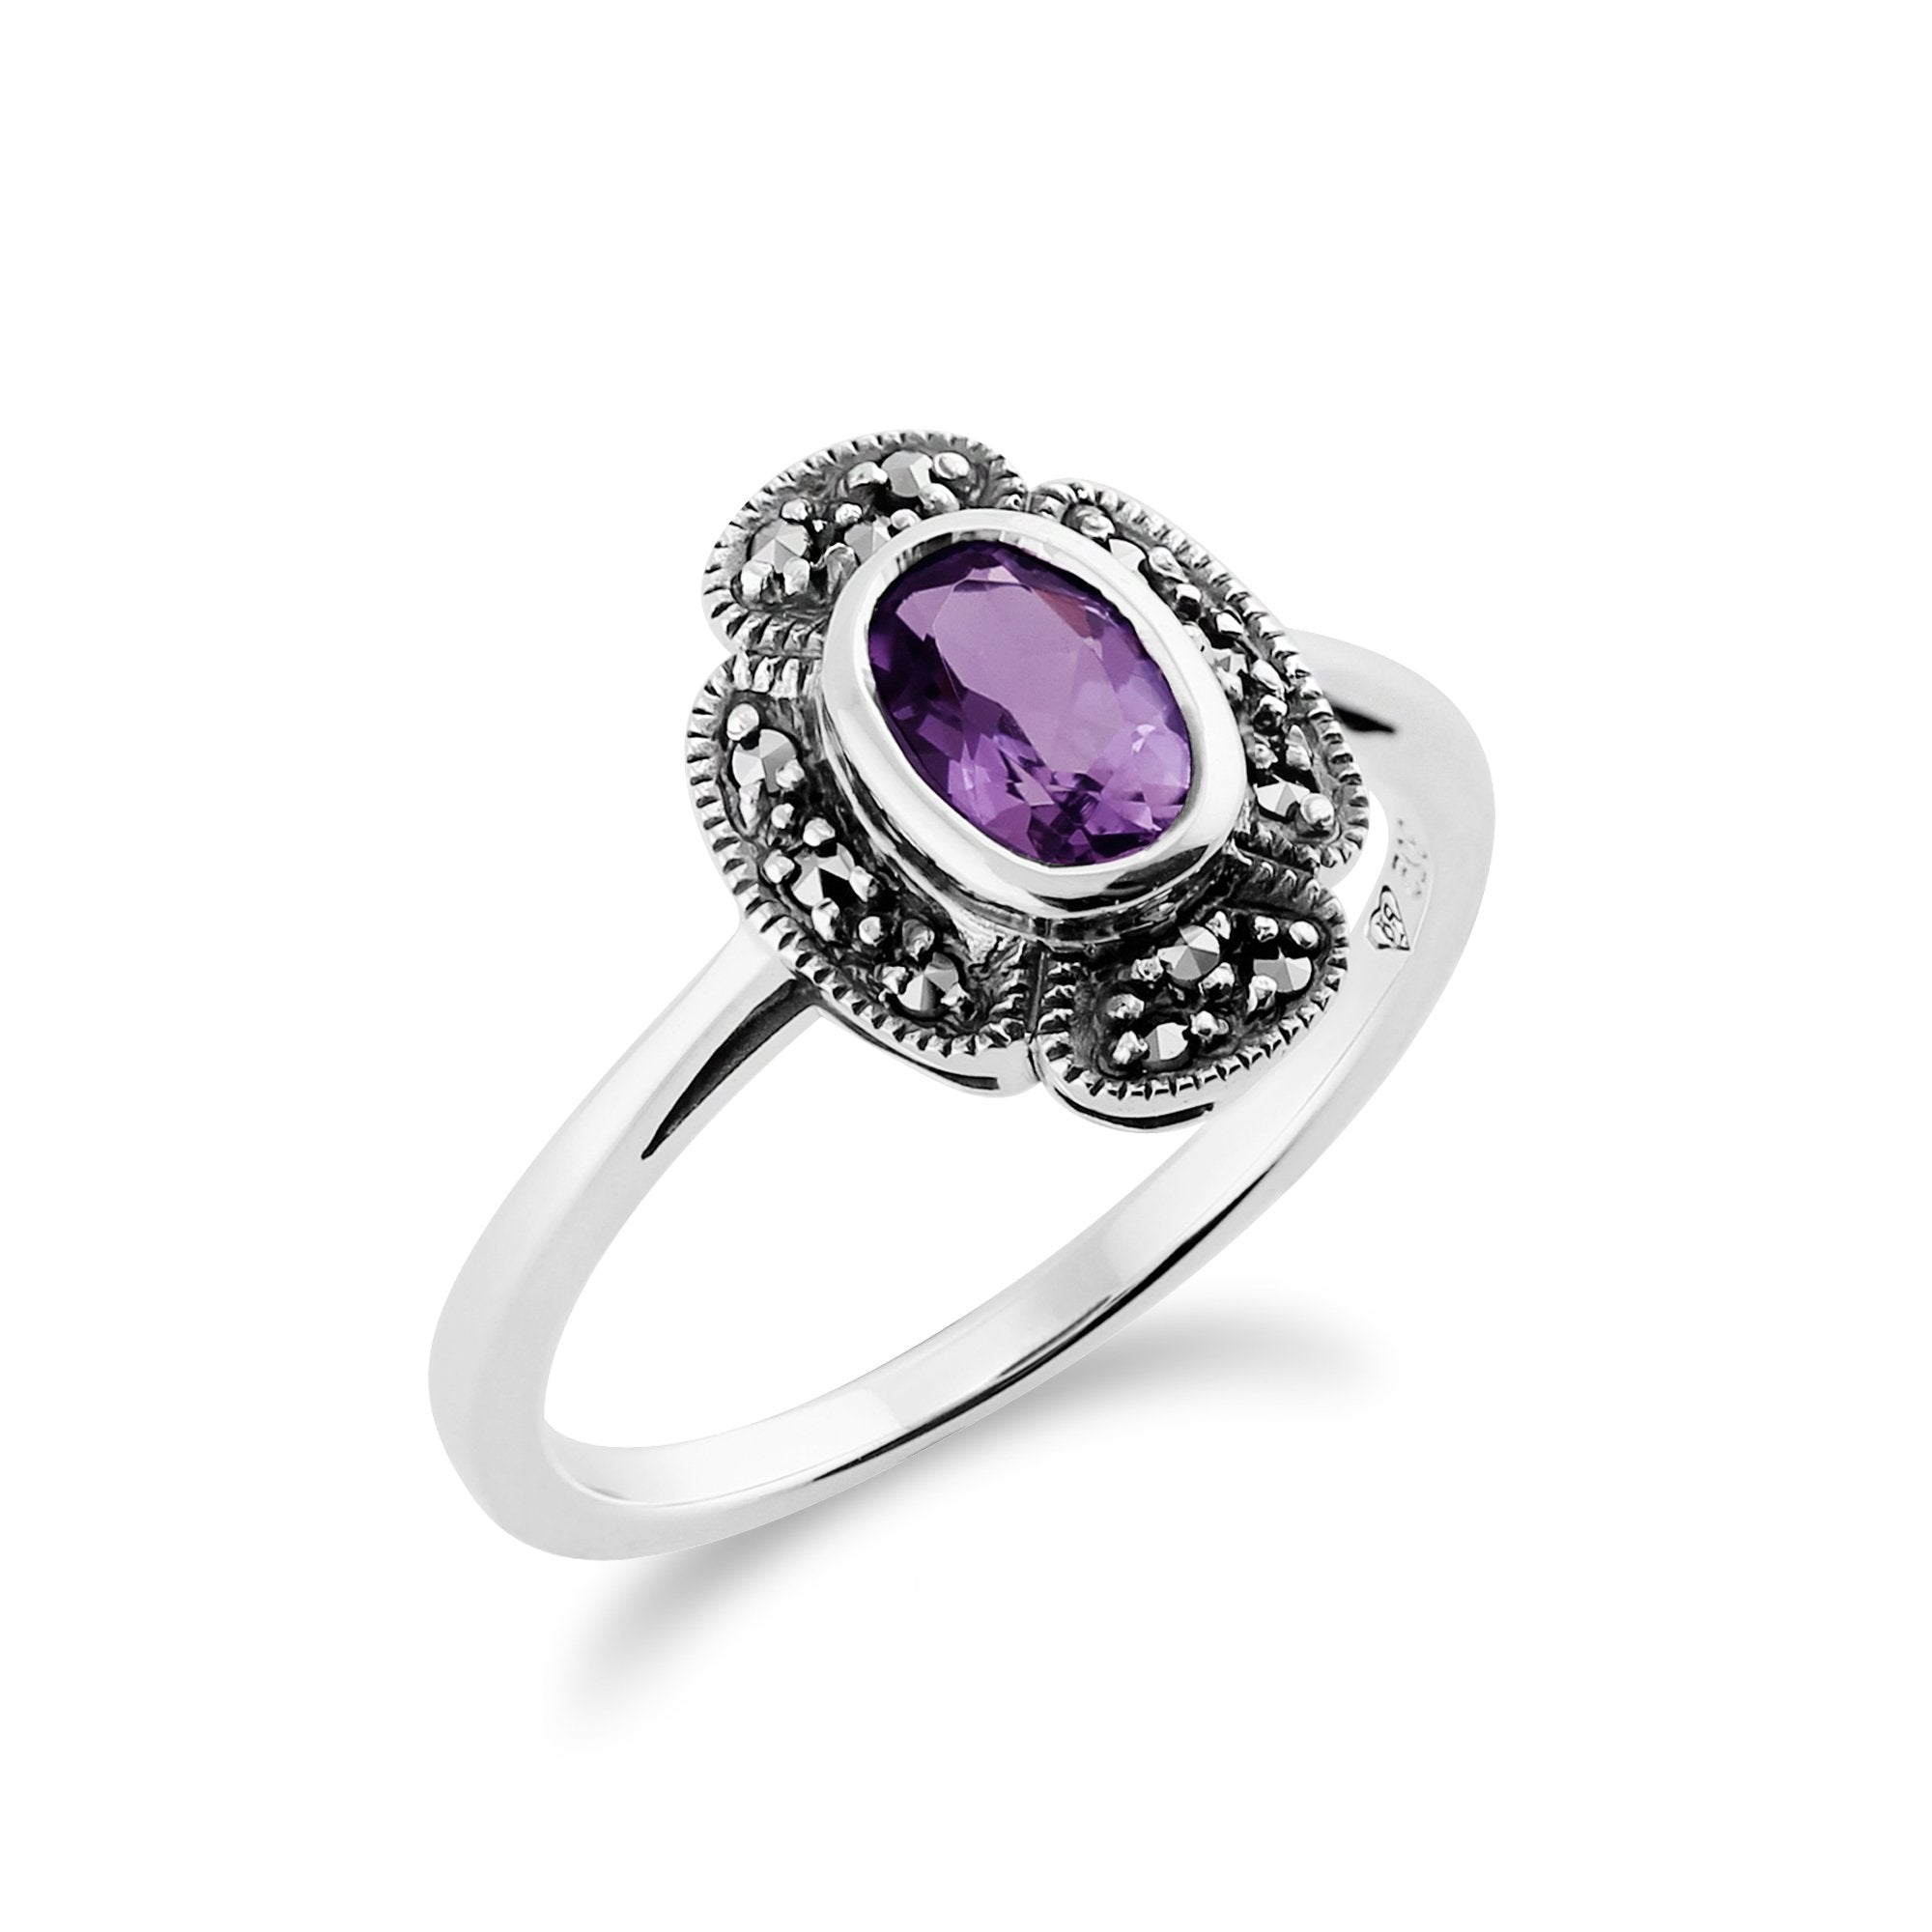 Art Deco Style Oval Amethyst & Marcasite Ring in 925 Sterling Silver